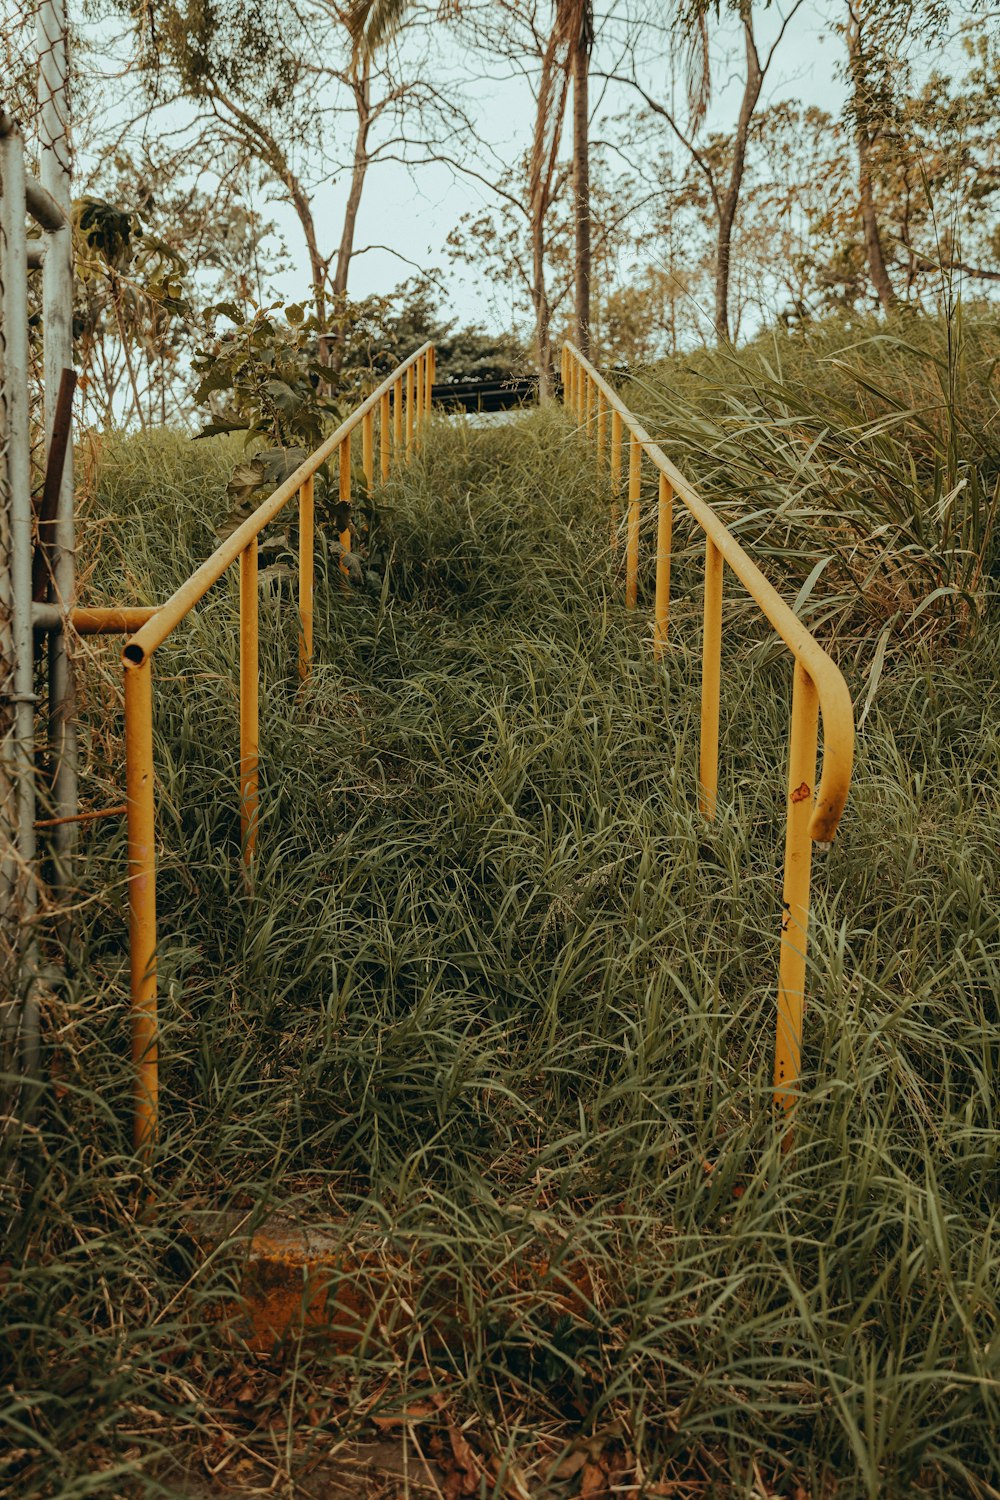 a set of yellow railings in a grassy area